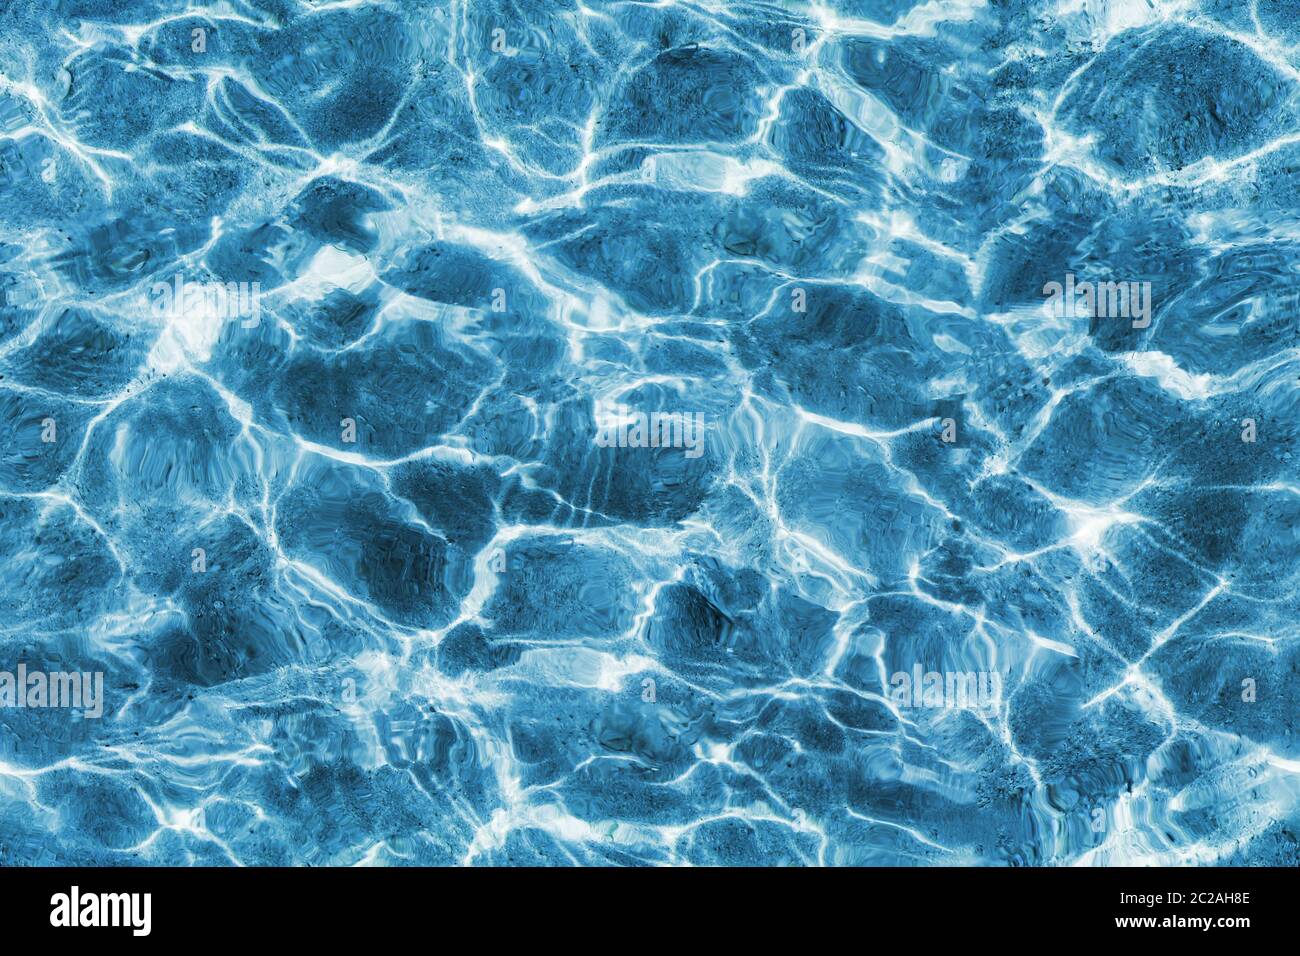 https://c8.alamy.com/comp/2C2AH8E/seamless-transparent-water-surface-with-ripples-sea-or-pool-water-surface-with-light-reflections-2C2AH8E.jpg